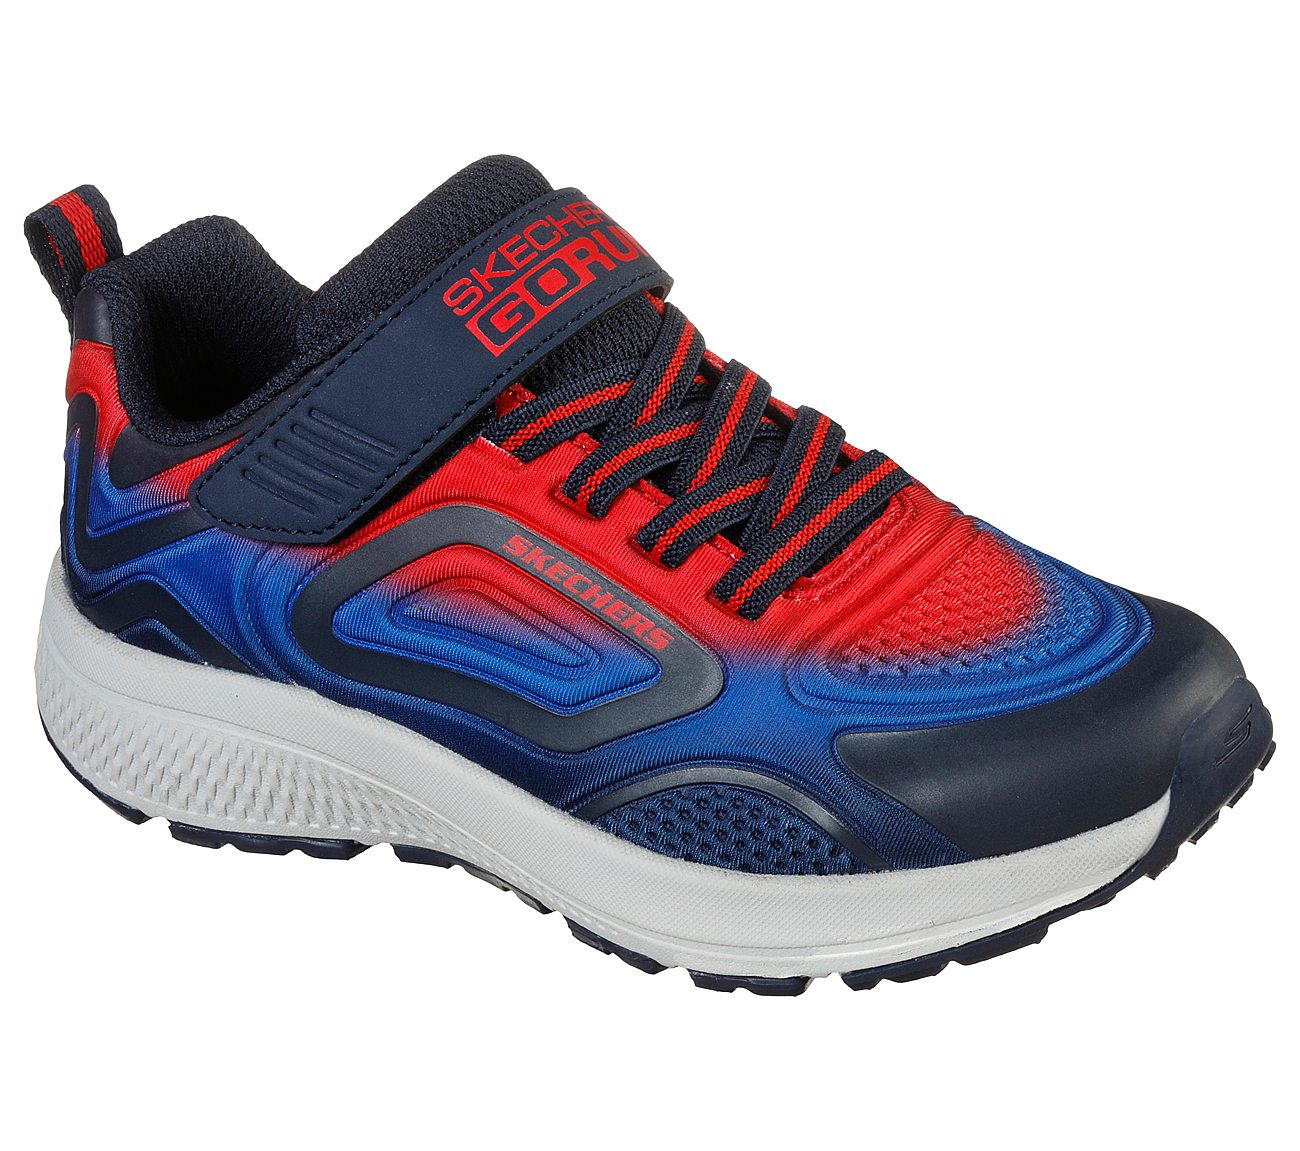 GO RUN CONSISTENT-SURGE SONIC, NAVY/RED Footwear Right View